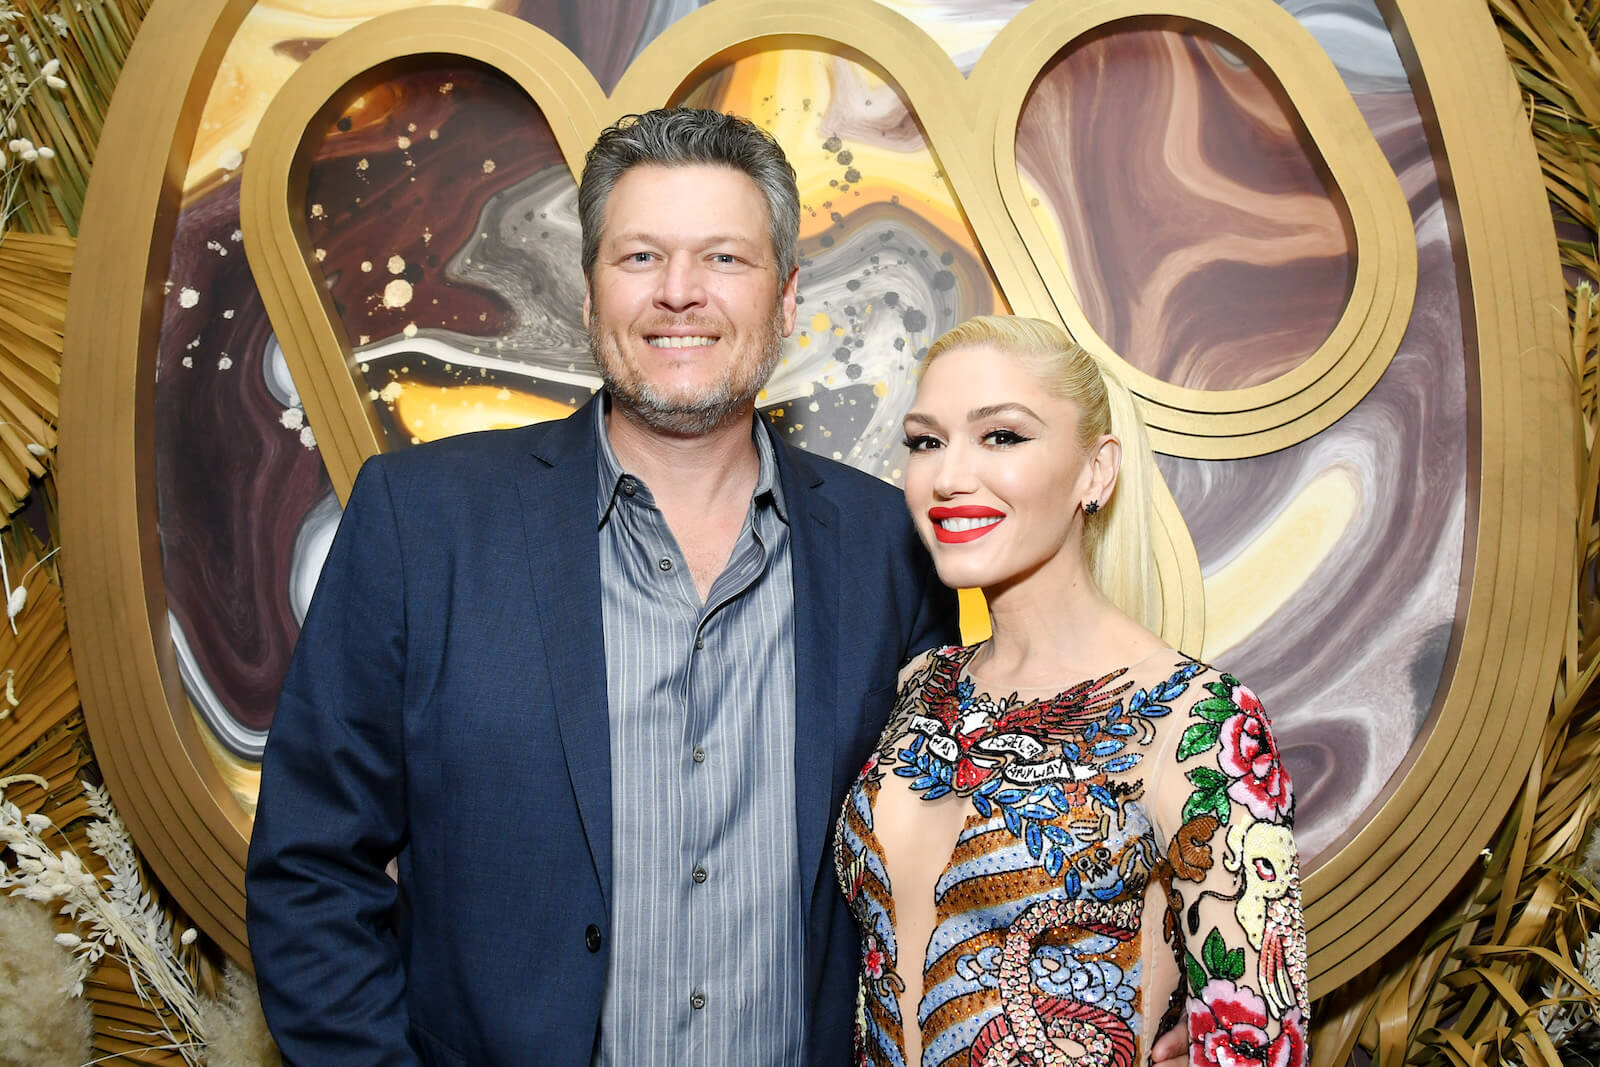 Gwen Stefani and Blake Shelton smiling at an event in 2020